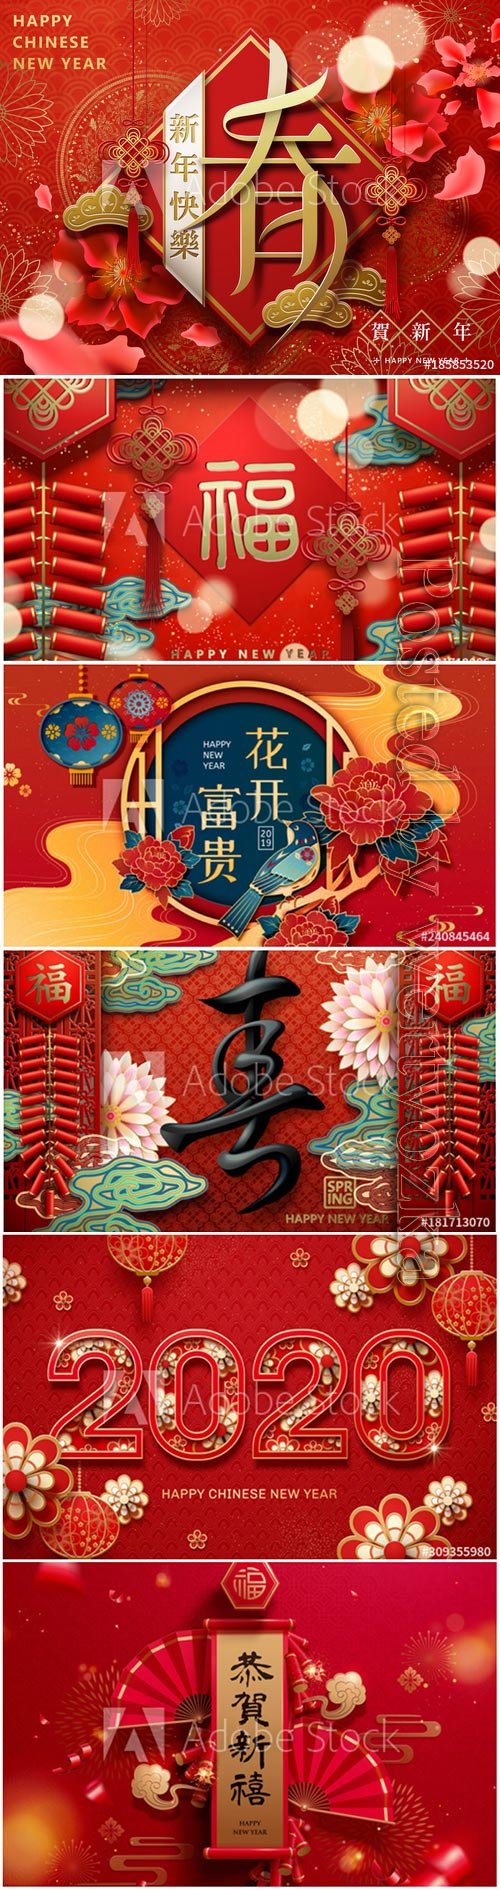 Happy chinese new year vector design